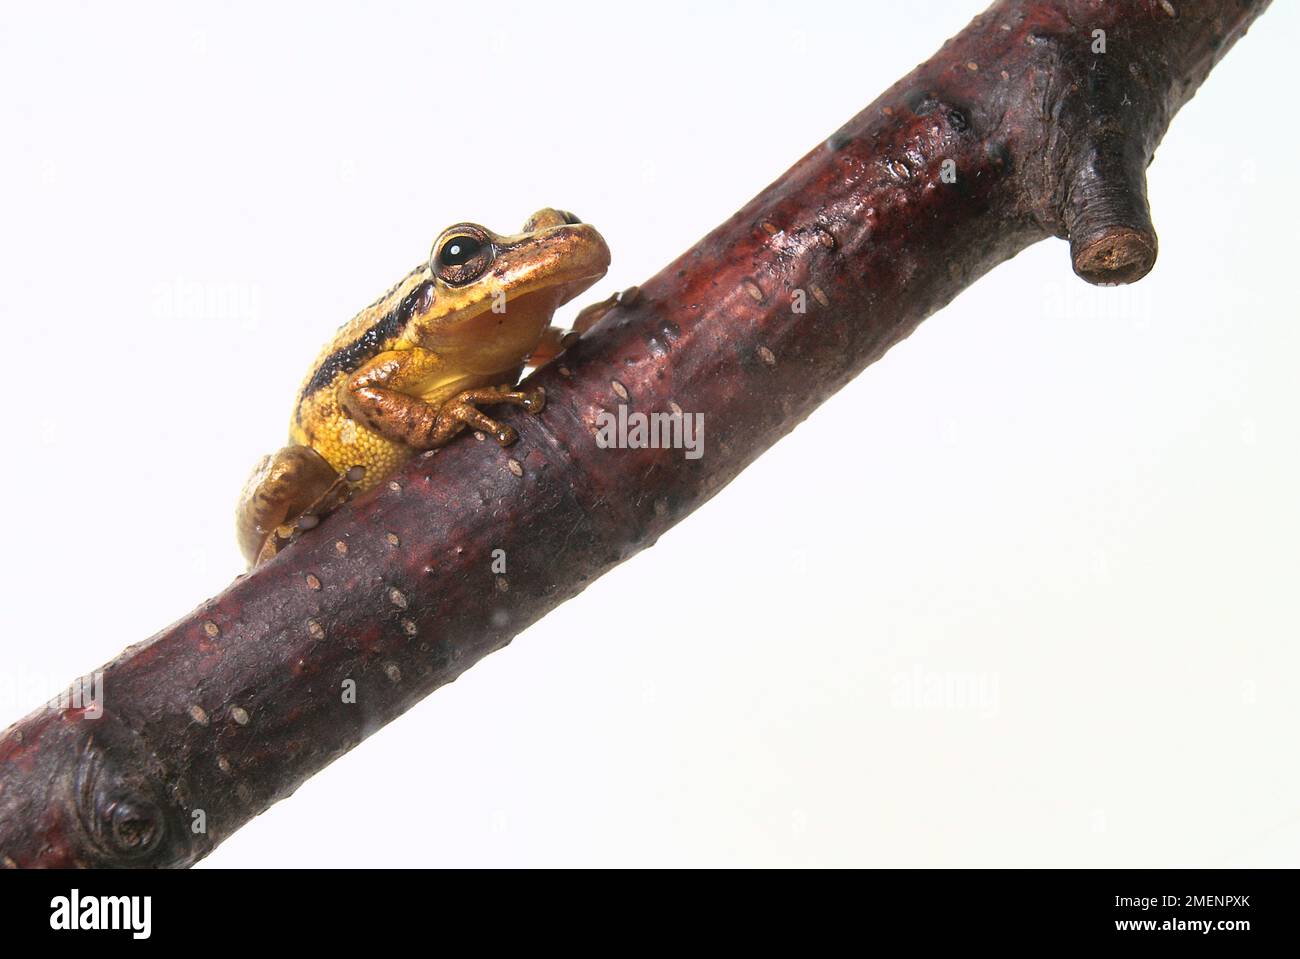 Front view of Banana Tree Frog sitting on branch Stock Photo